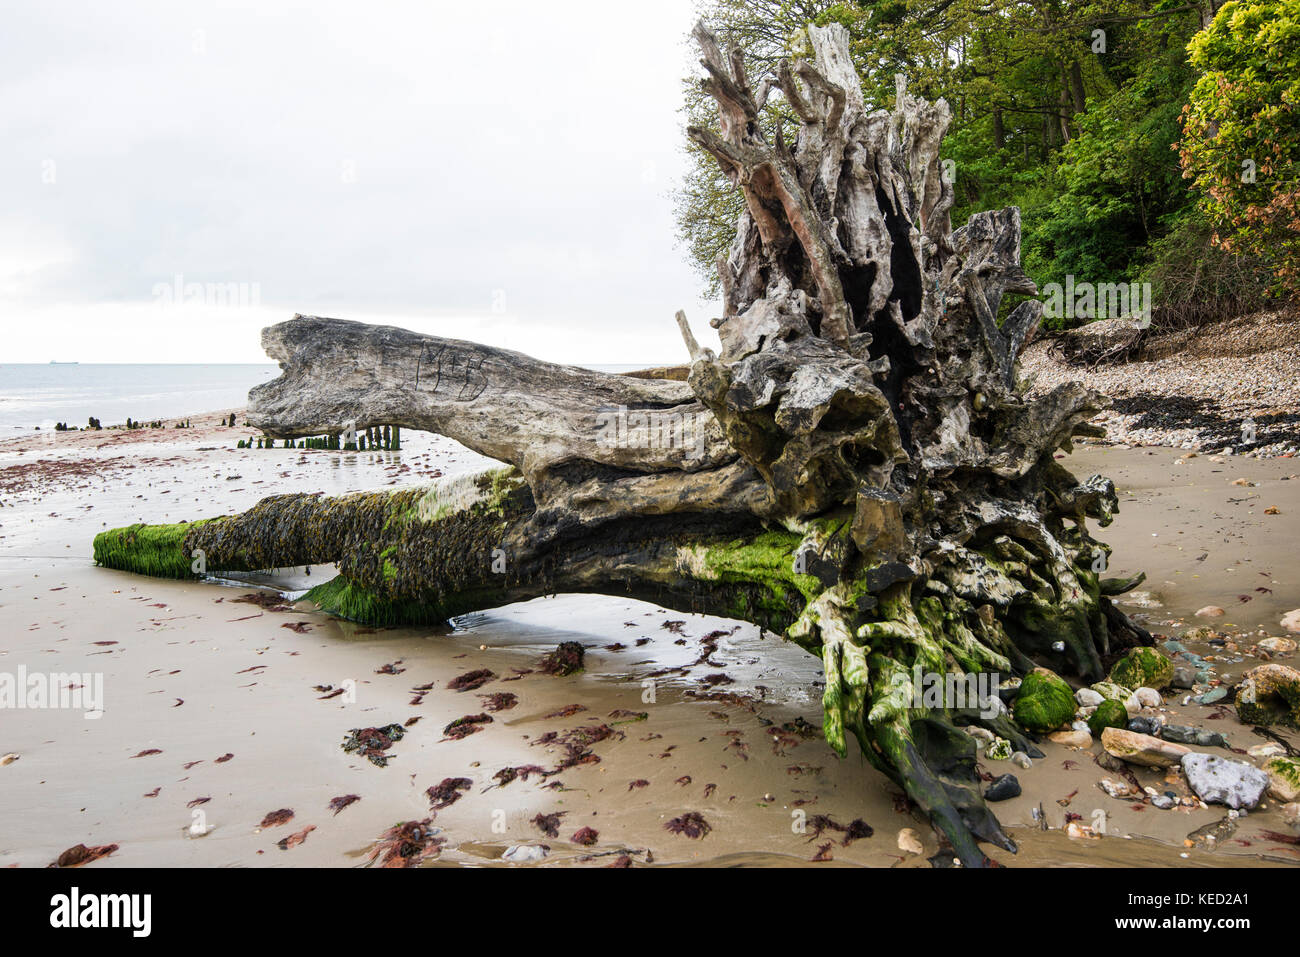 Sea Level Rise - Tree Collapse. As the average sea level rises - maybe due to global warming - so trees that were once on land, collapse into the sea. Stock Photo